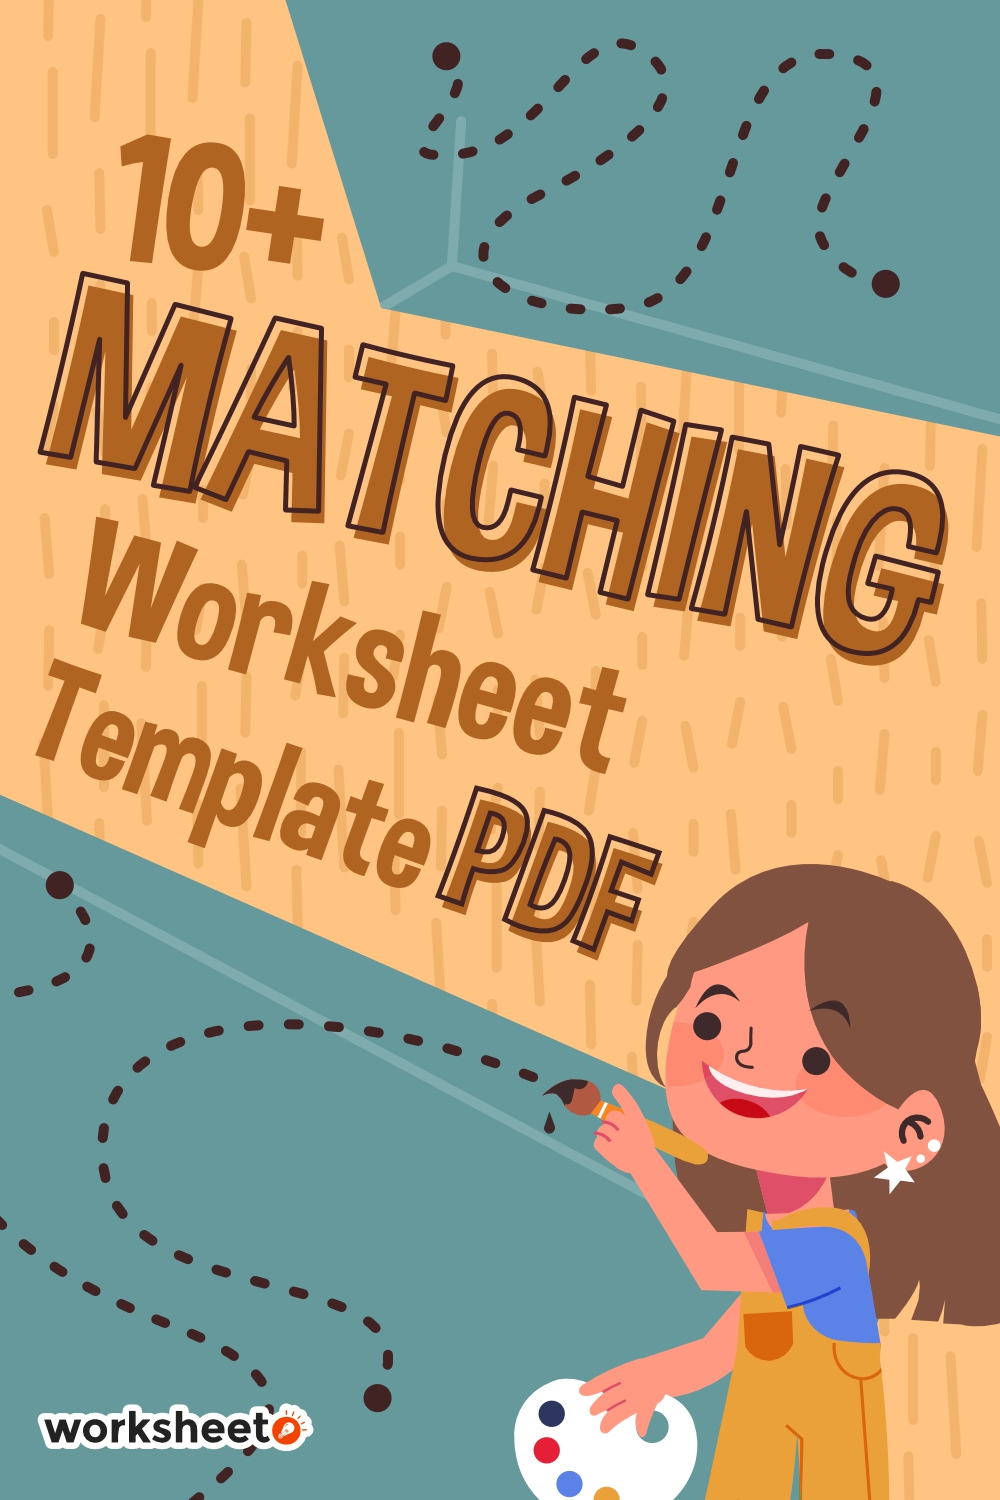 17 Images of Matching Worksheet Template PDF